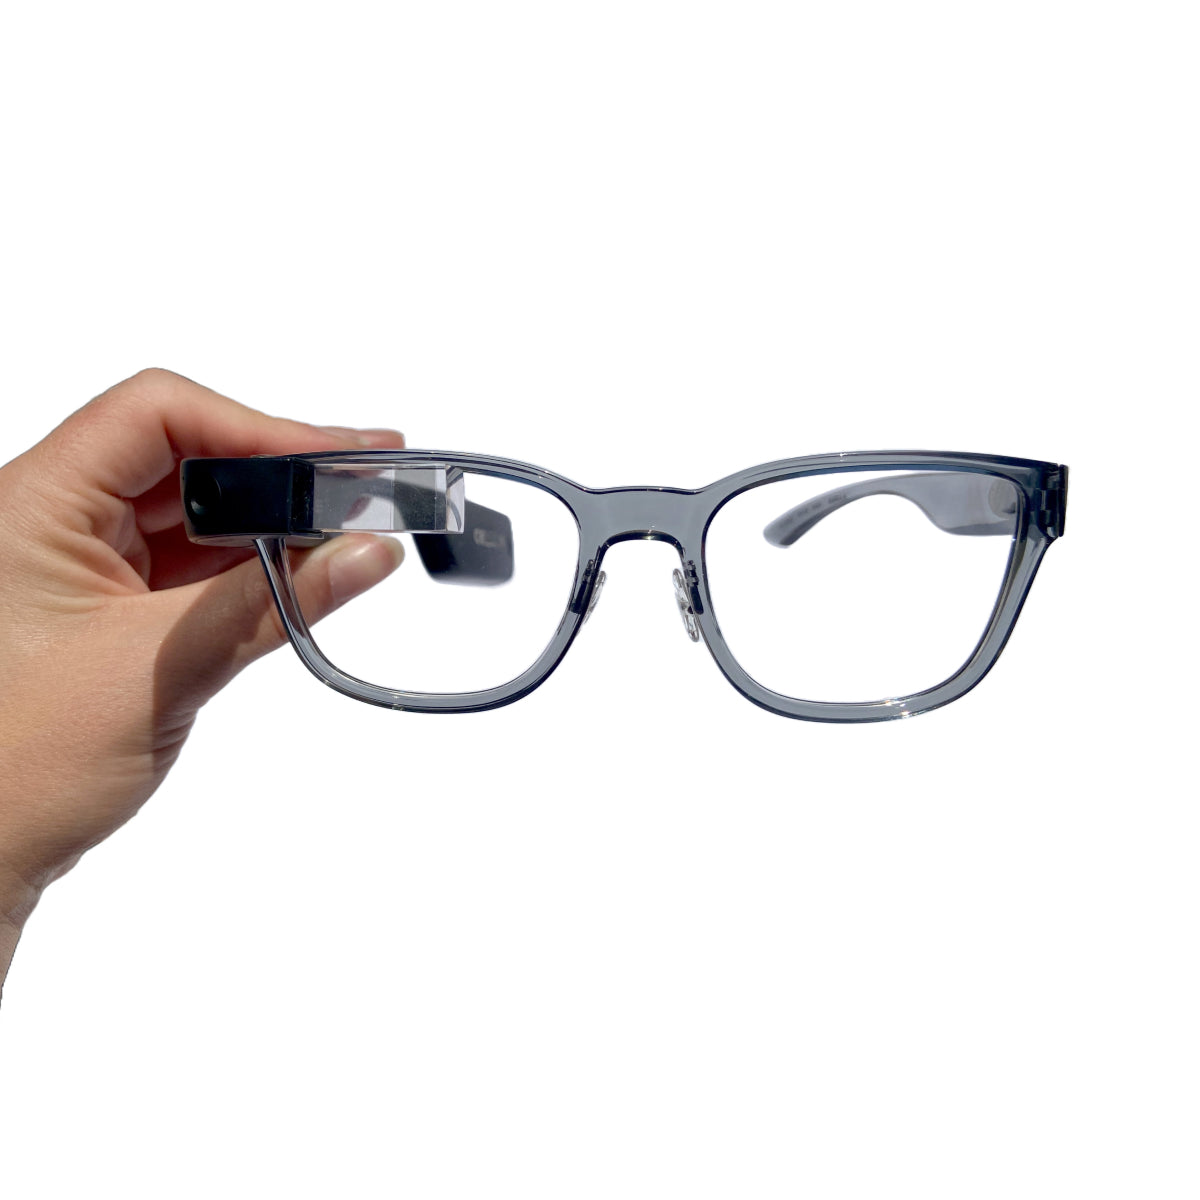 Transparent grey frames attached to the Envision Glasses - Hand holding the frames